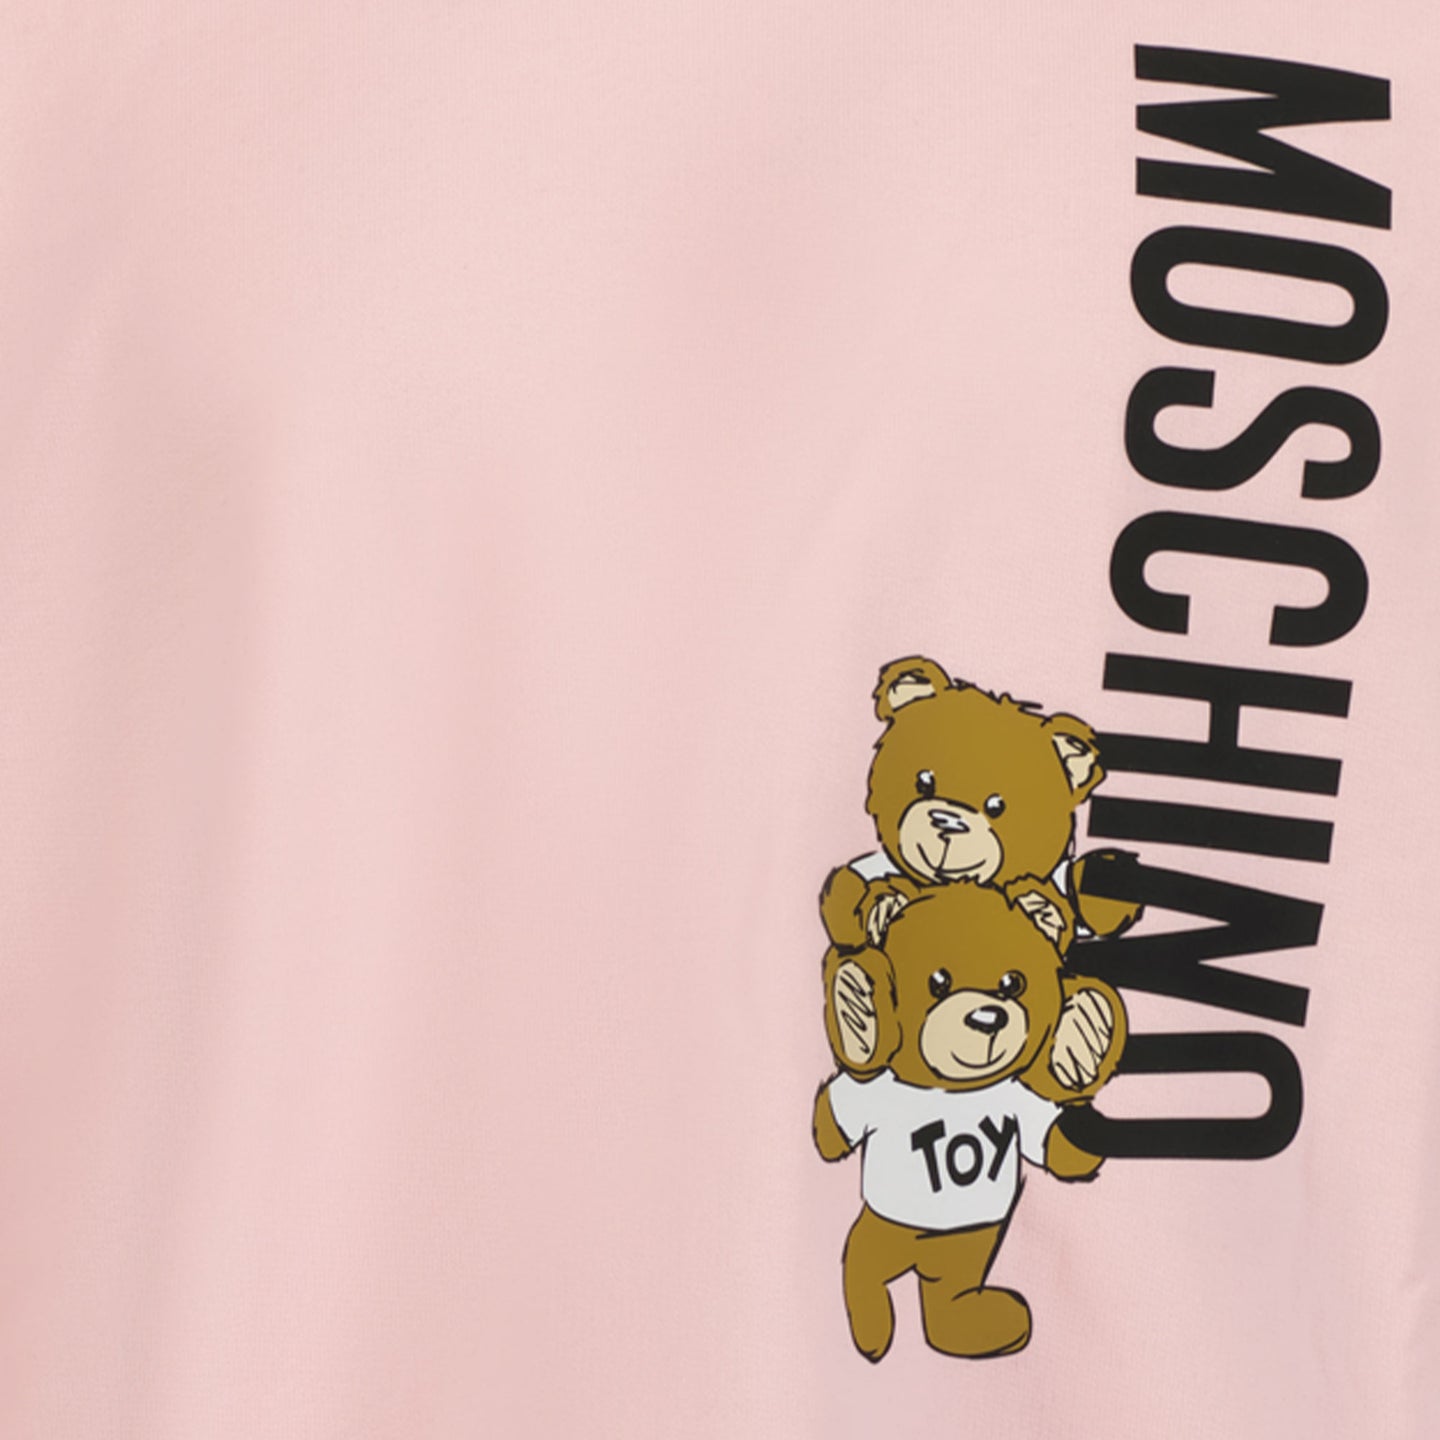 Moschino Unisexe Pull-over Rose Léger